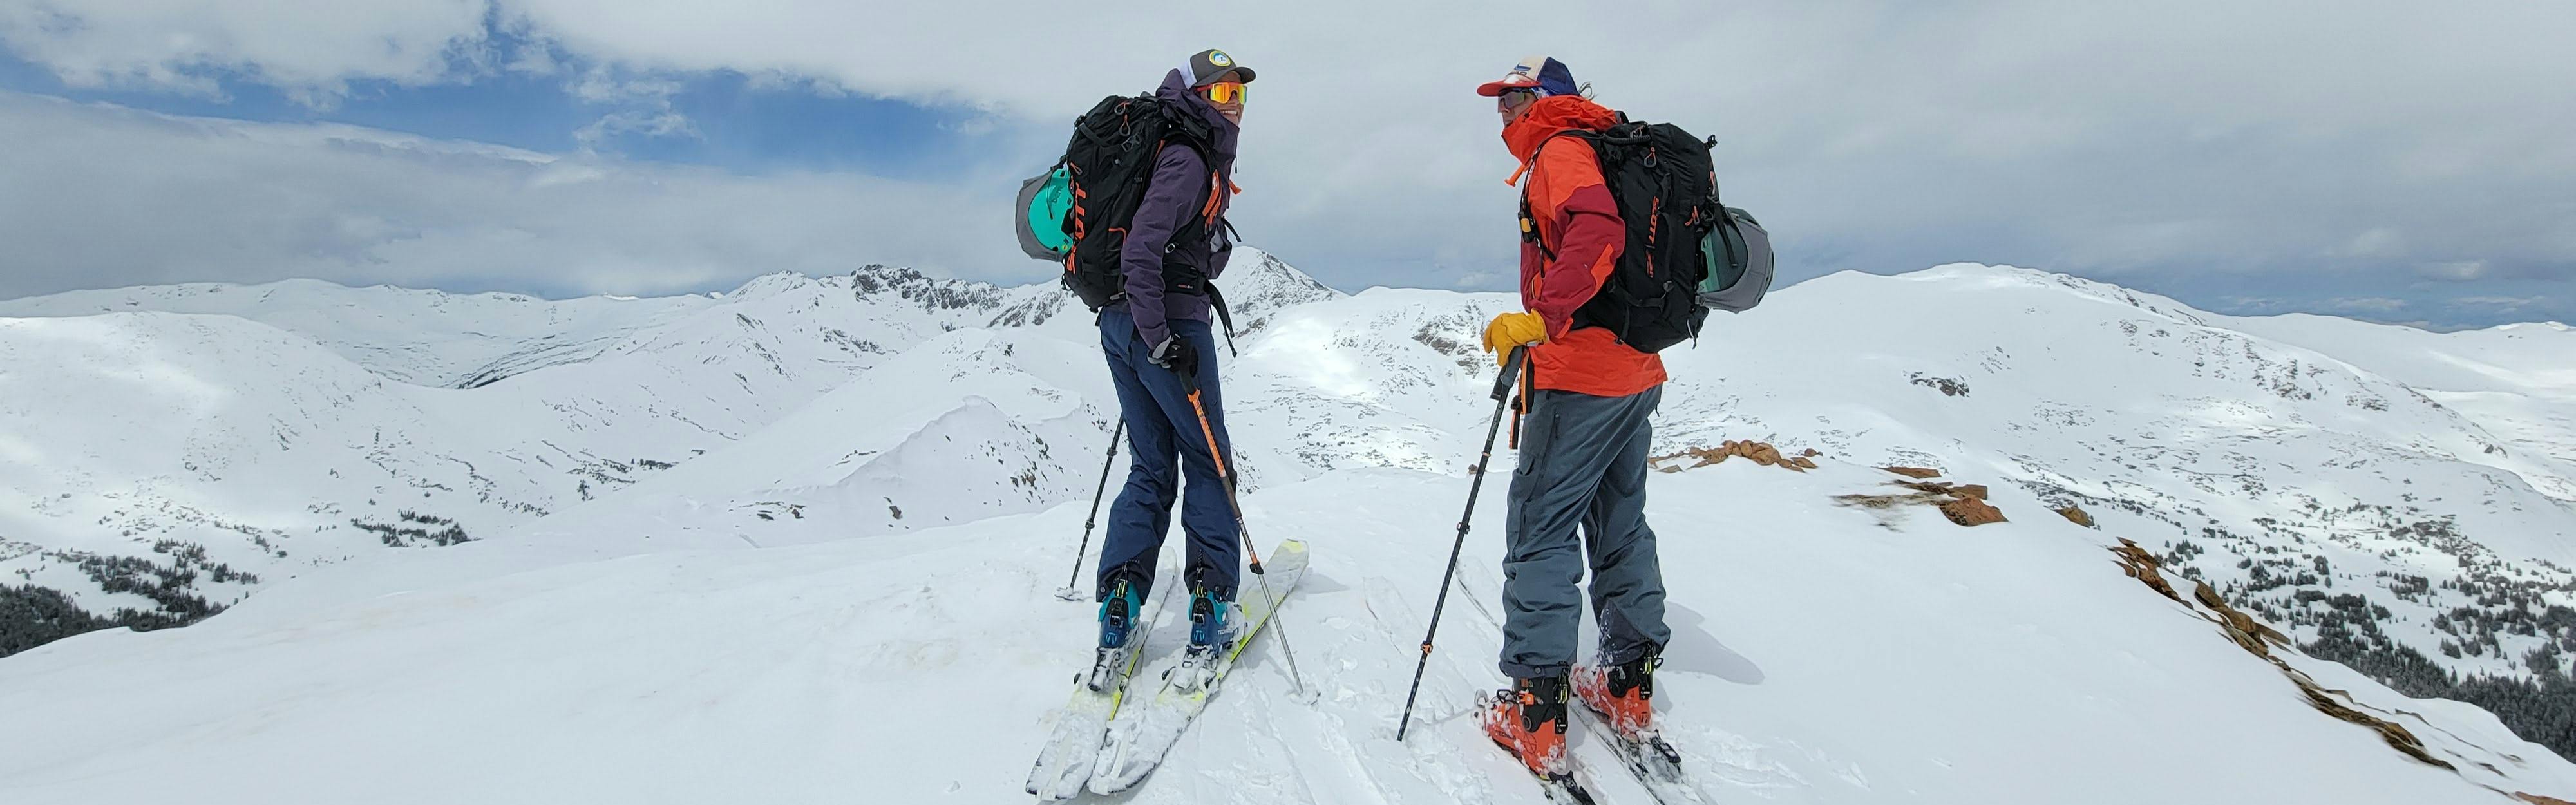 Two women are standing at the top of a snowy run with their backcountry ski gear.